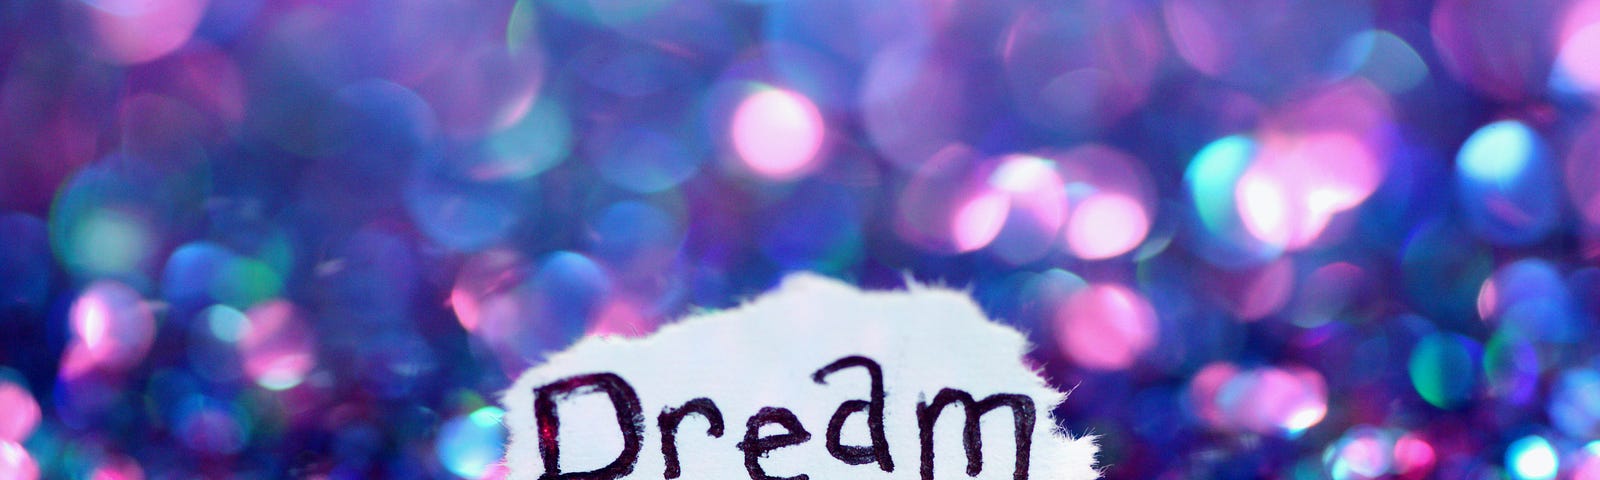 the word “Dream” with a colored background.